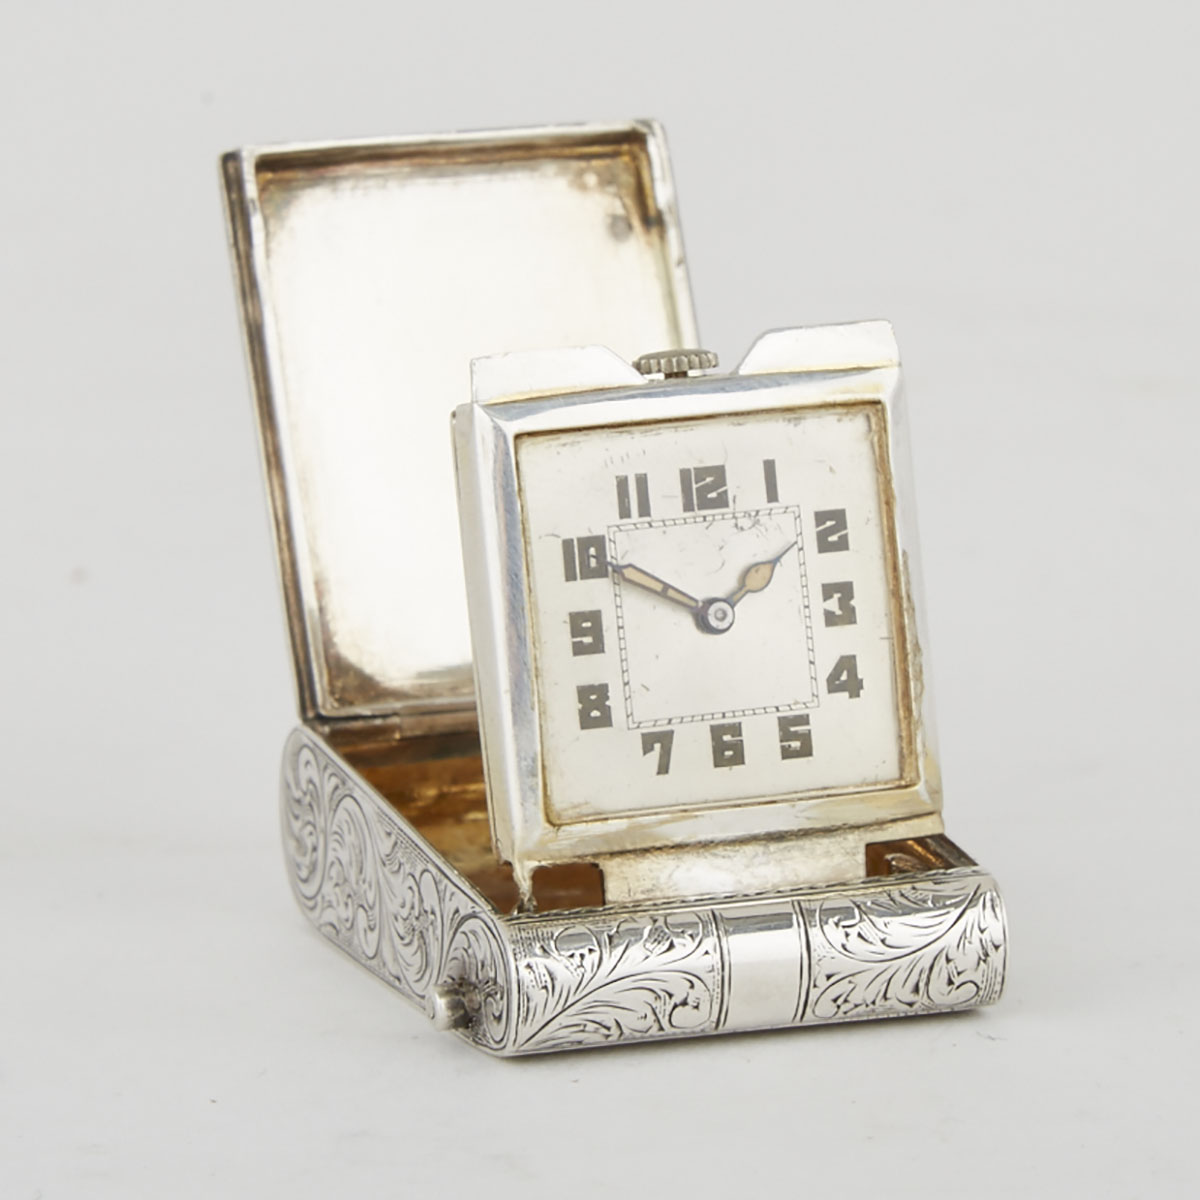 Canadian Silver Cased Travel Clock, Henry Birks & Sons, Montreal, Que., 20th century